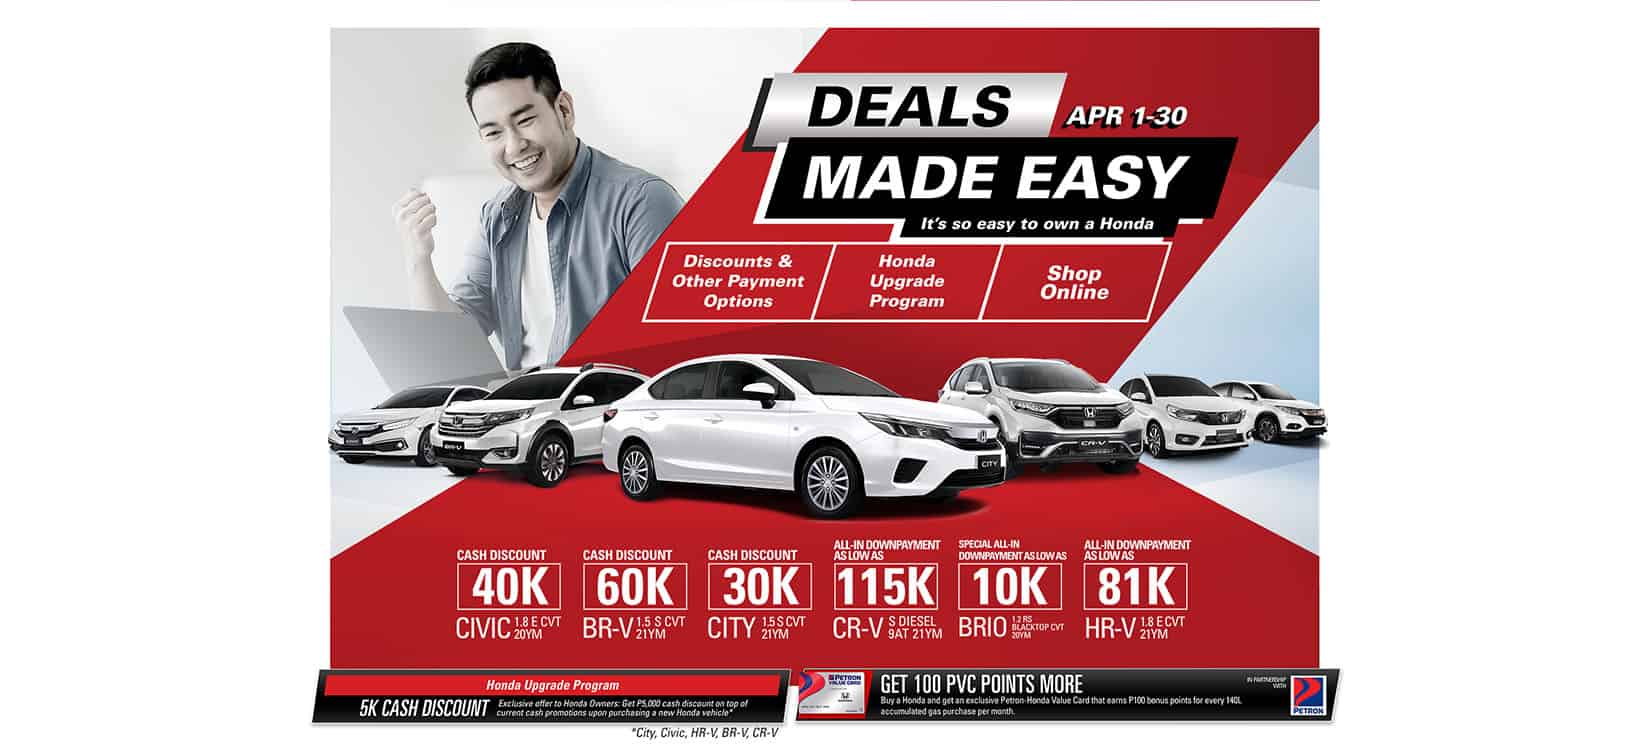 Honda launches Deals Made Easy campaign this April